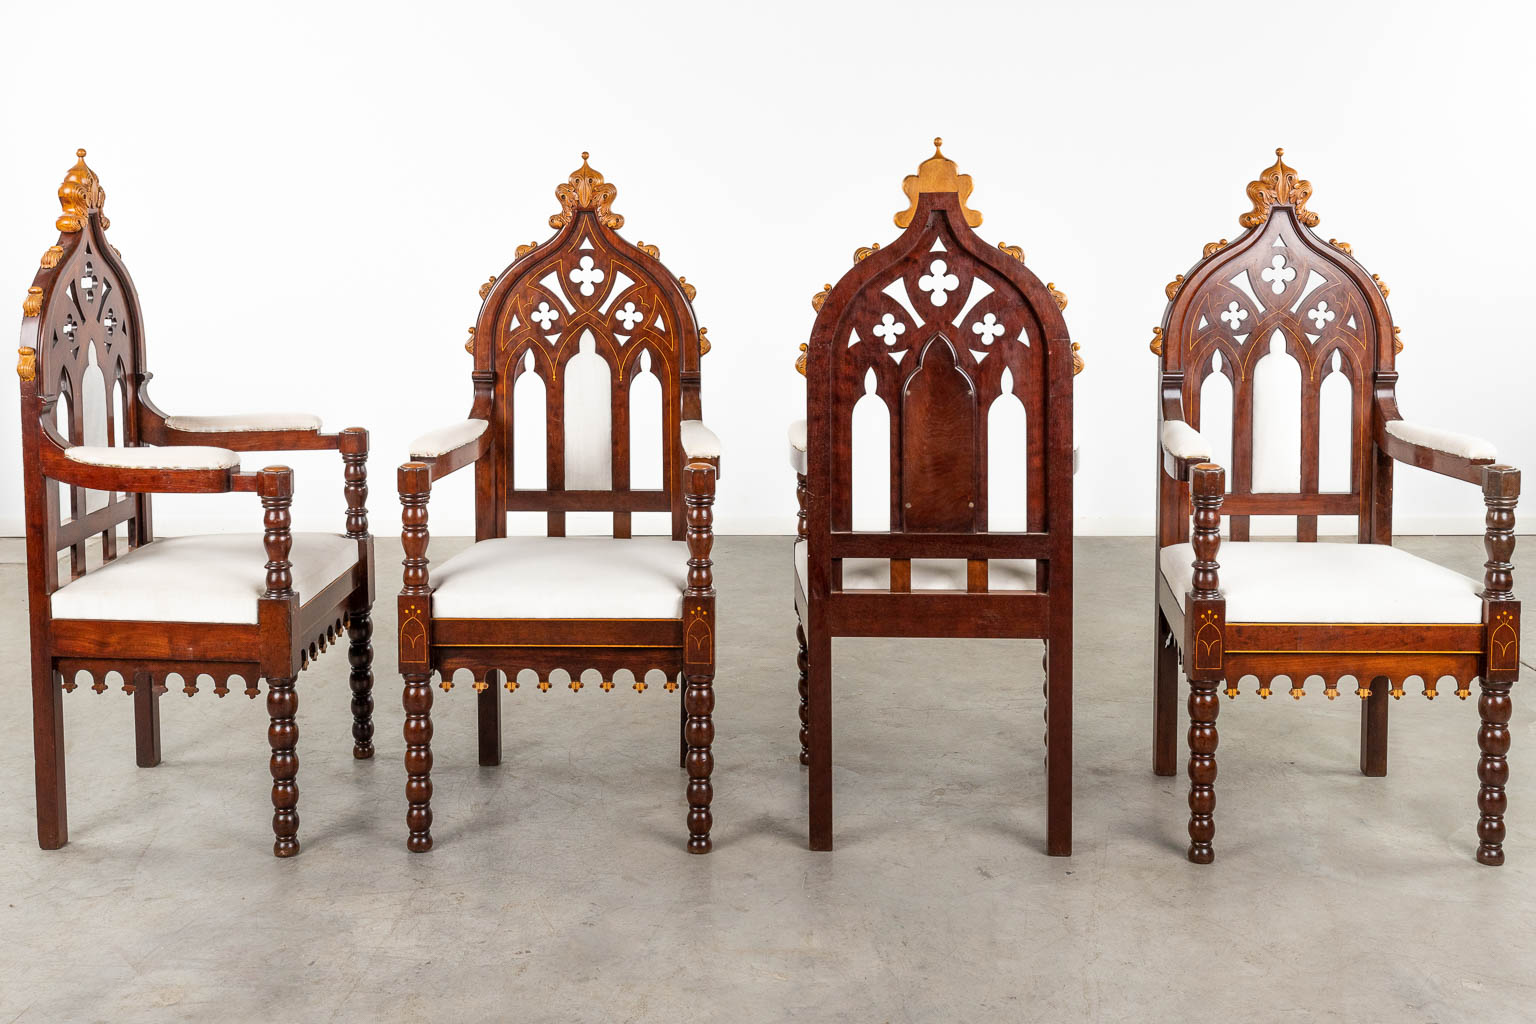 An exceptional set of 8 Thrones, sculptured wood in a gothic revival style. Circa 1880. (D:47 x W:56 - Image 7 of 11